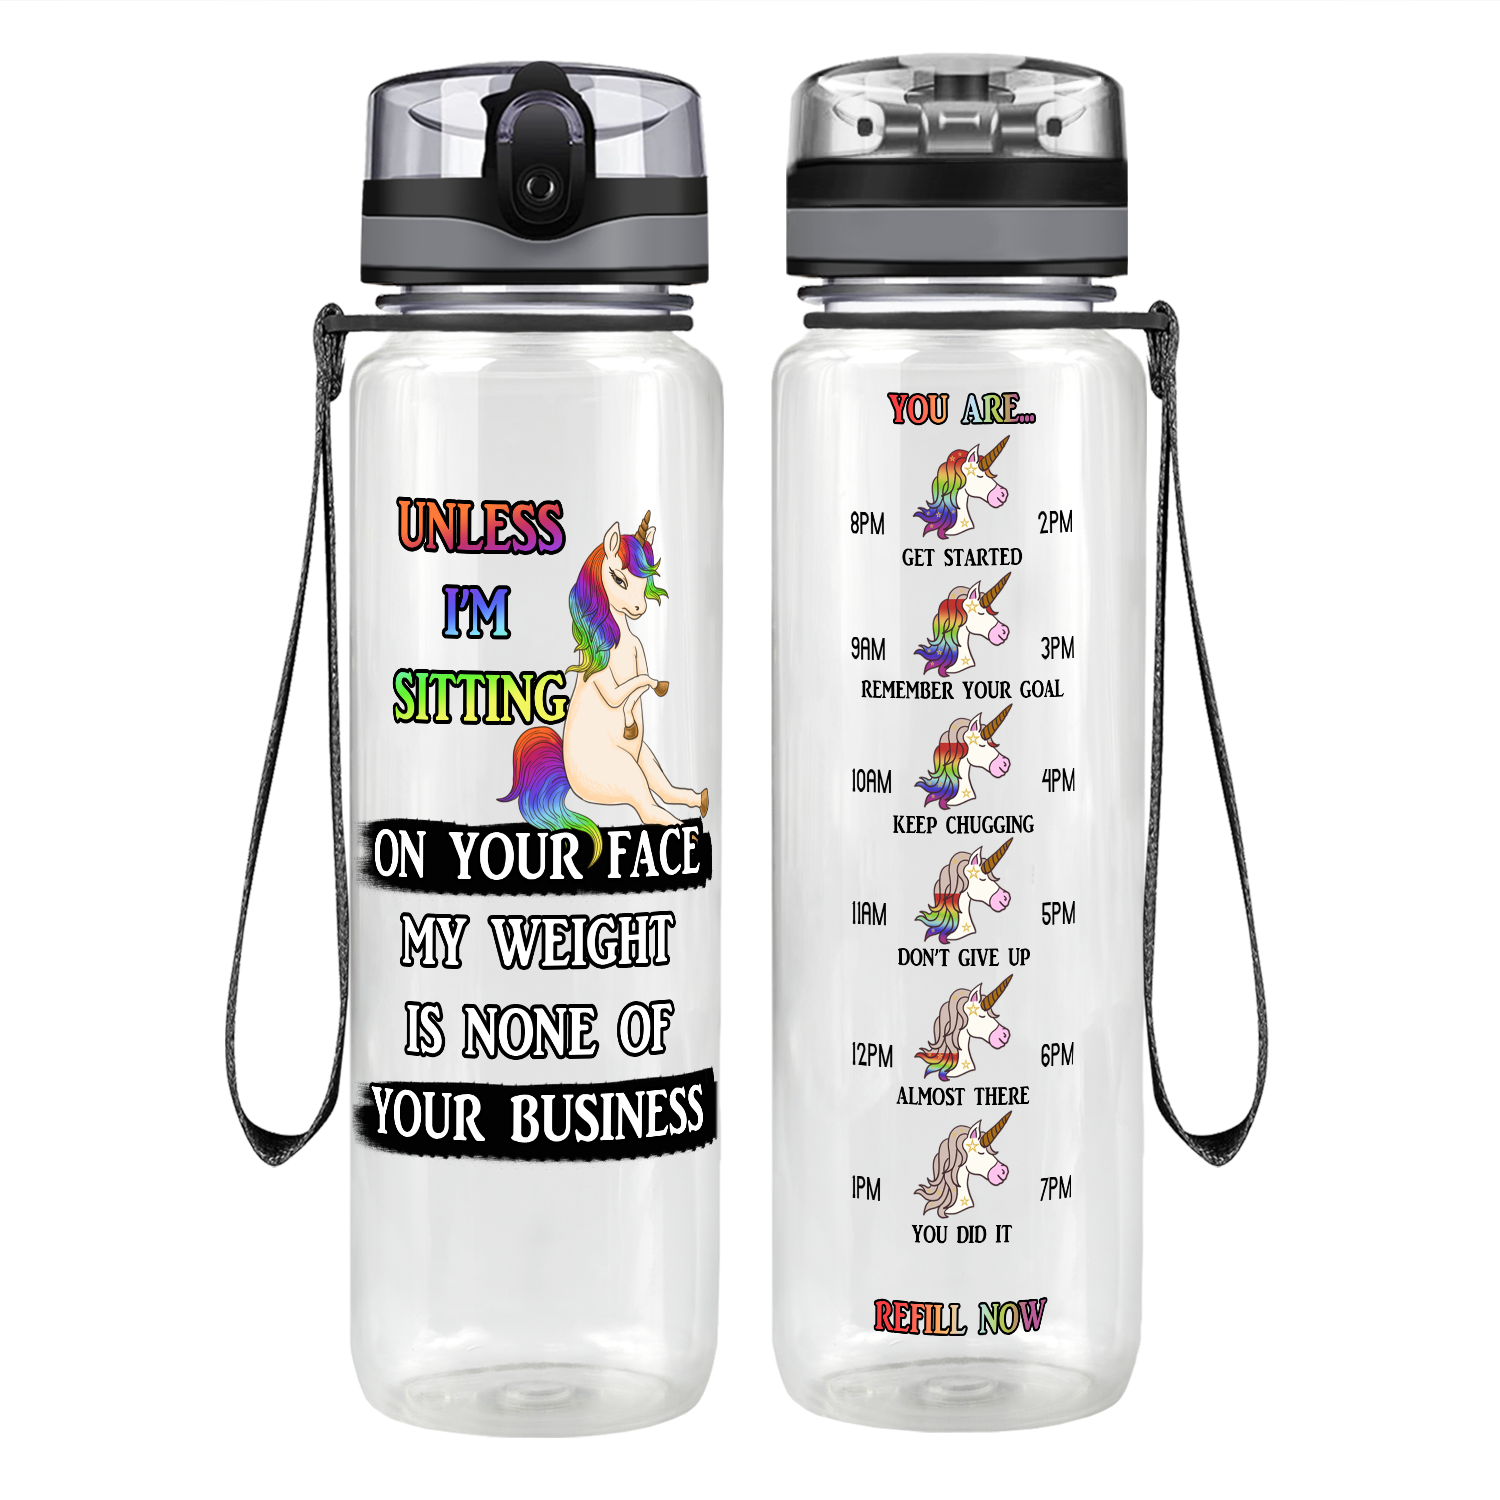 My Weight Is None Of Your Business Motivational Tracking Water Bottle